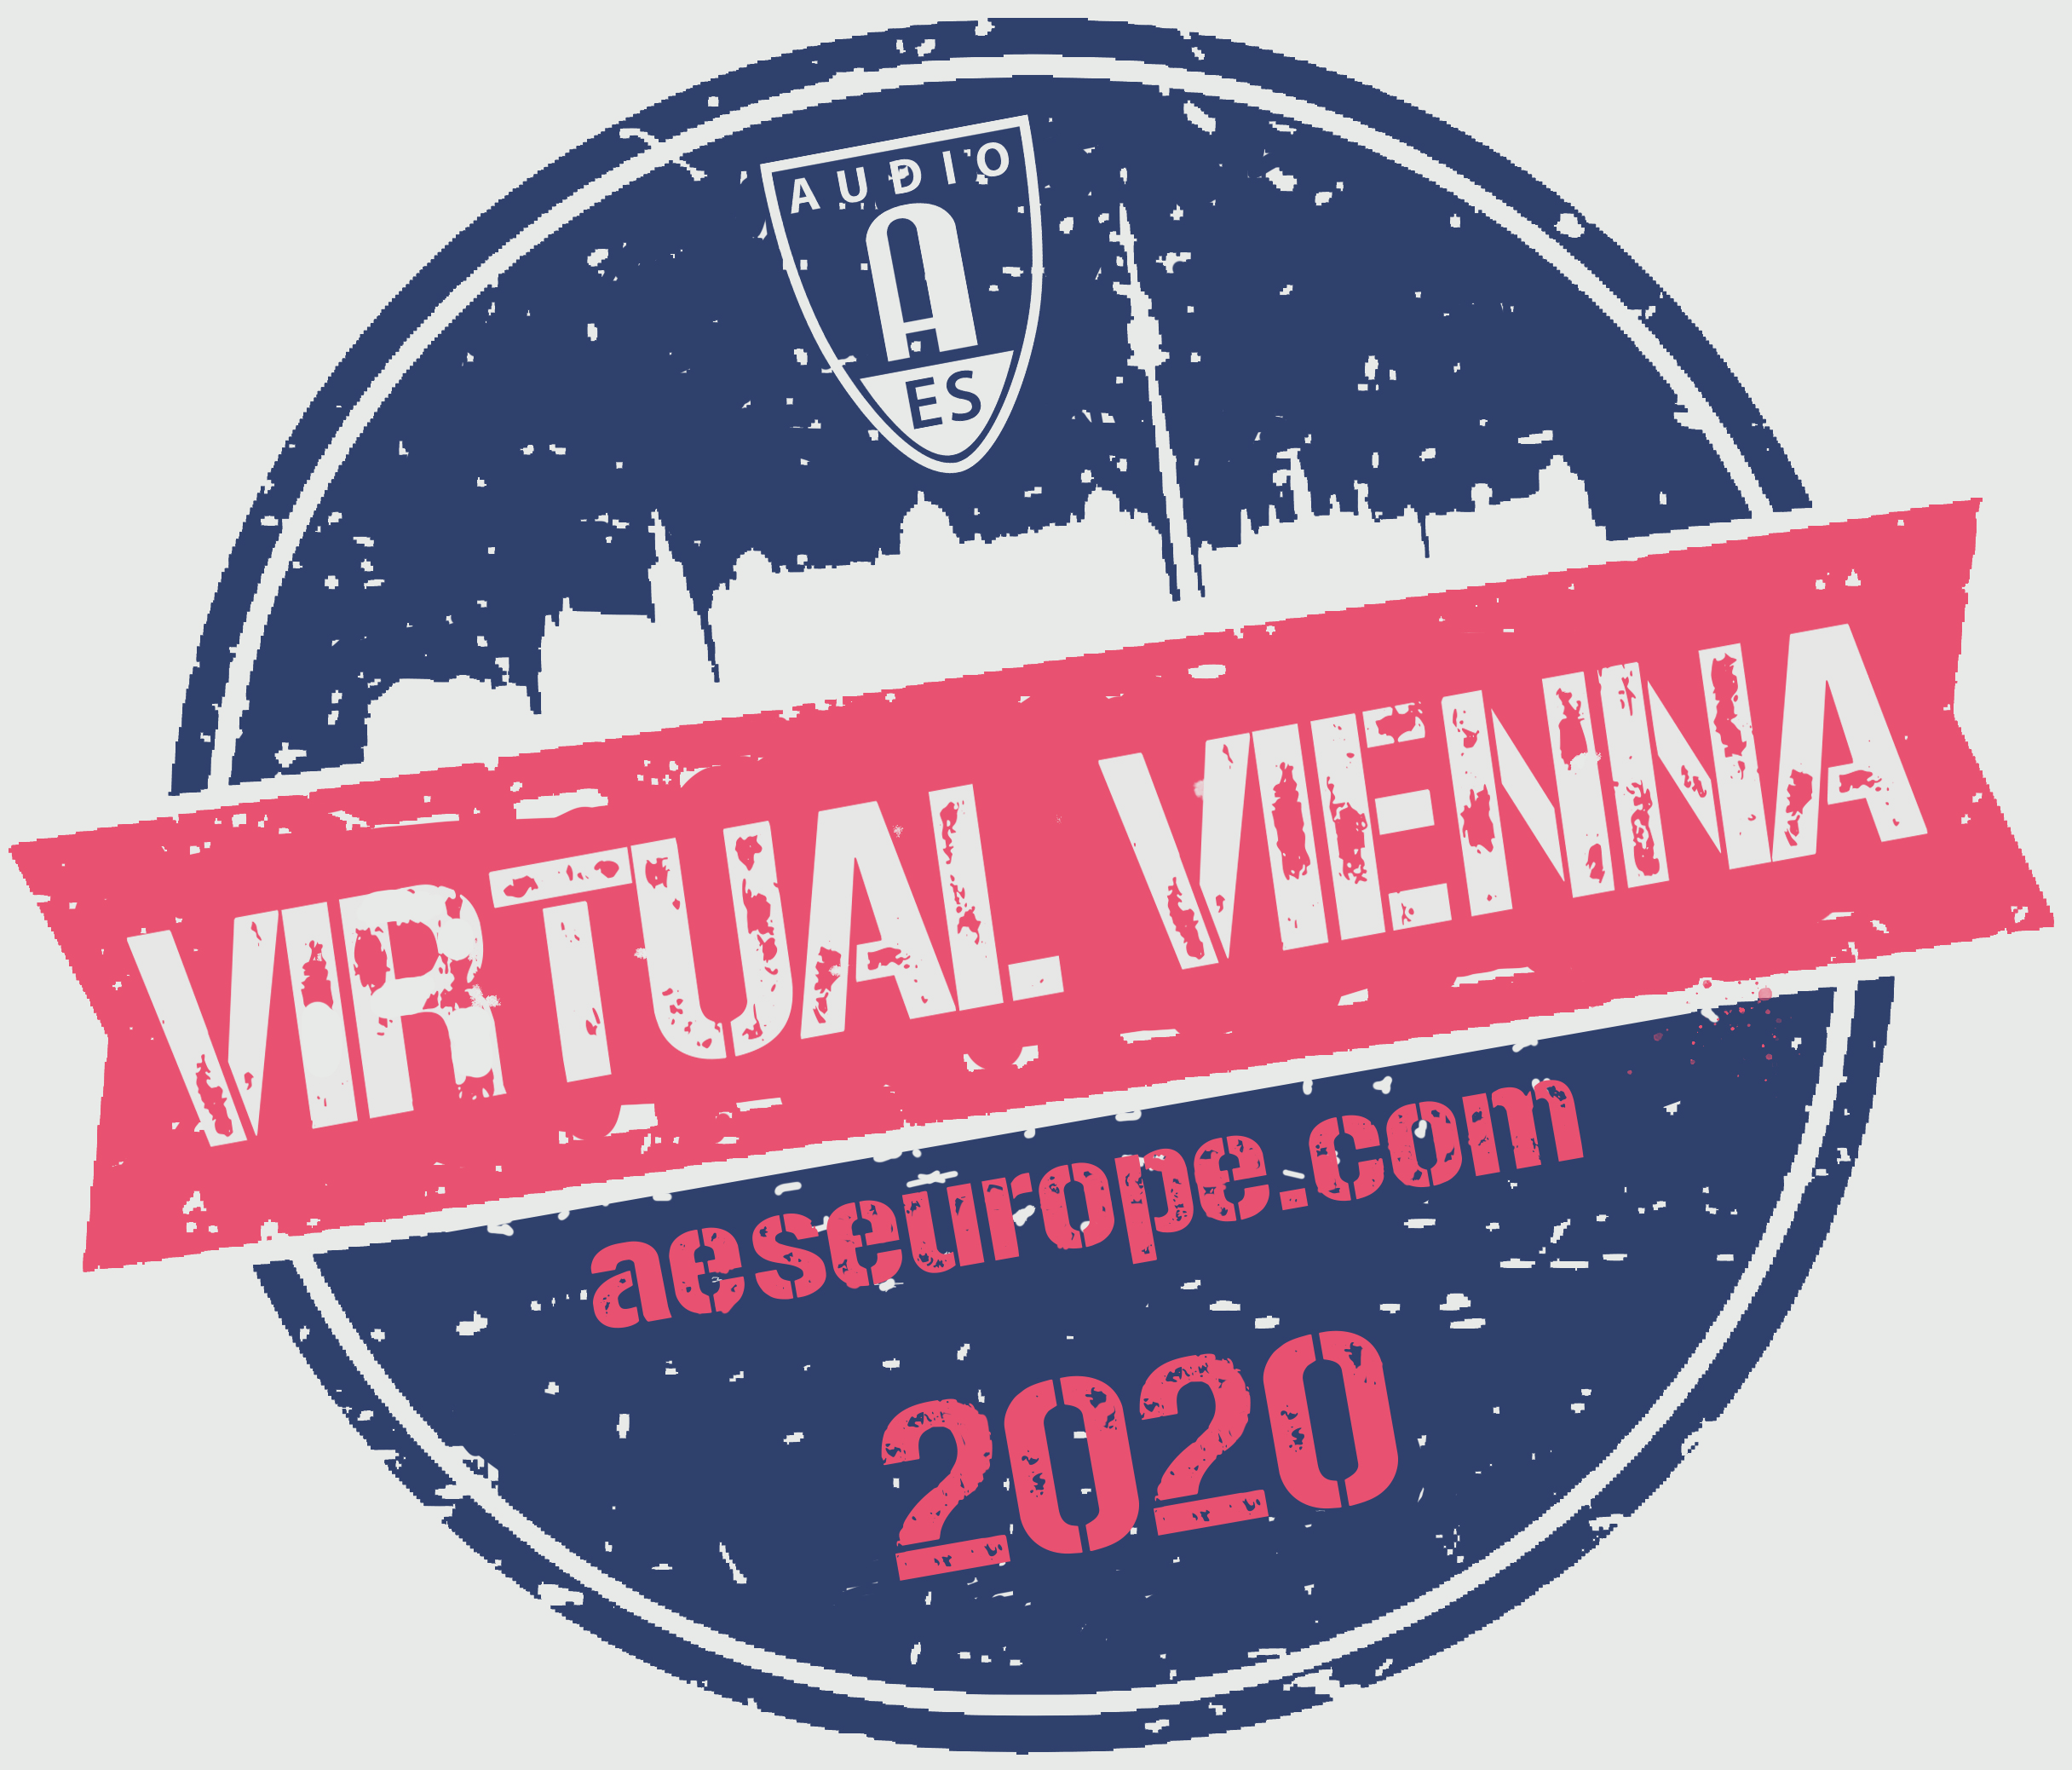 Registration is now open for the AES Virtual Vienna Convention online events, June 2 – 5